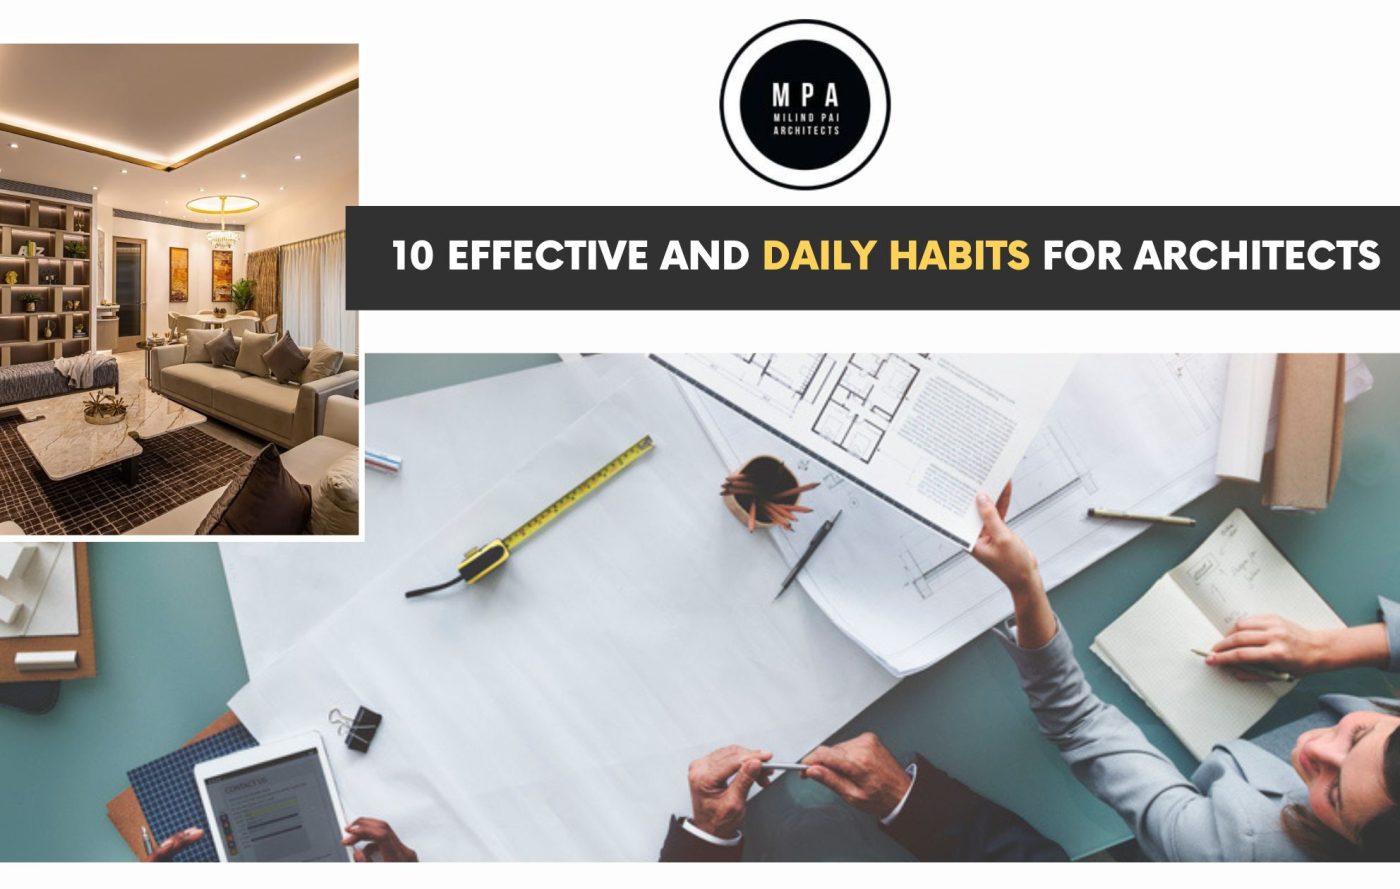 10 Effective and Daily Habits for Architects